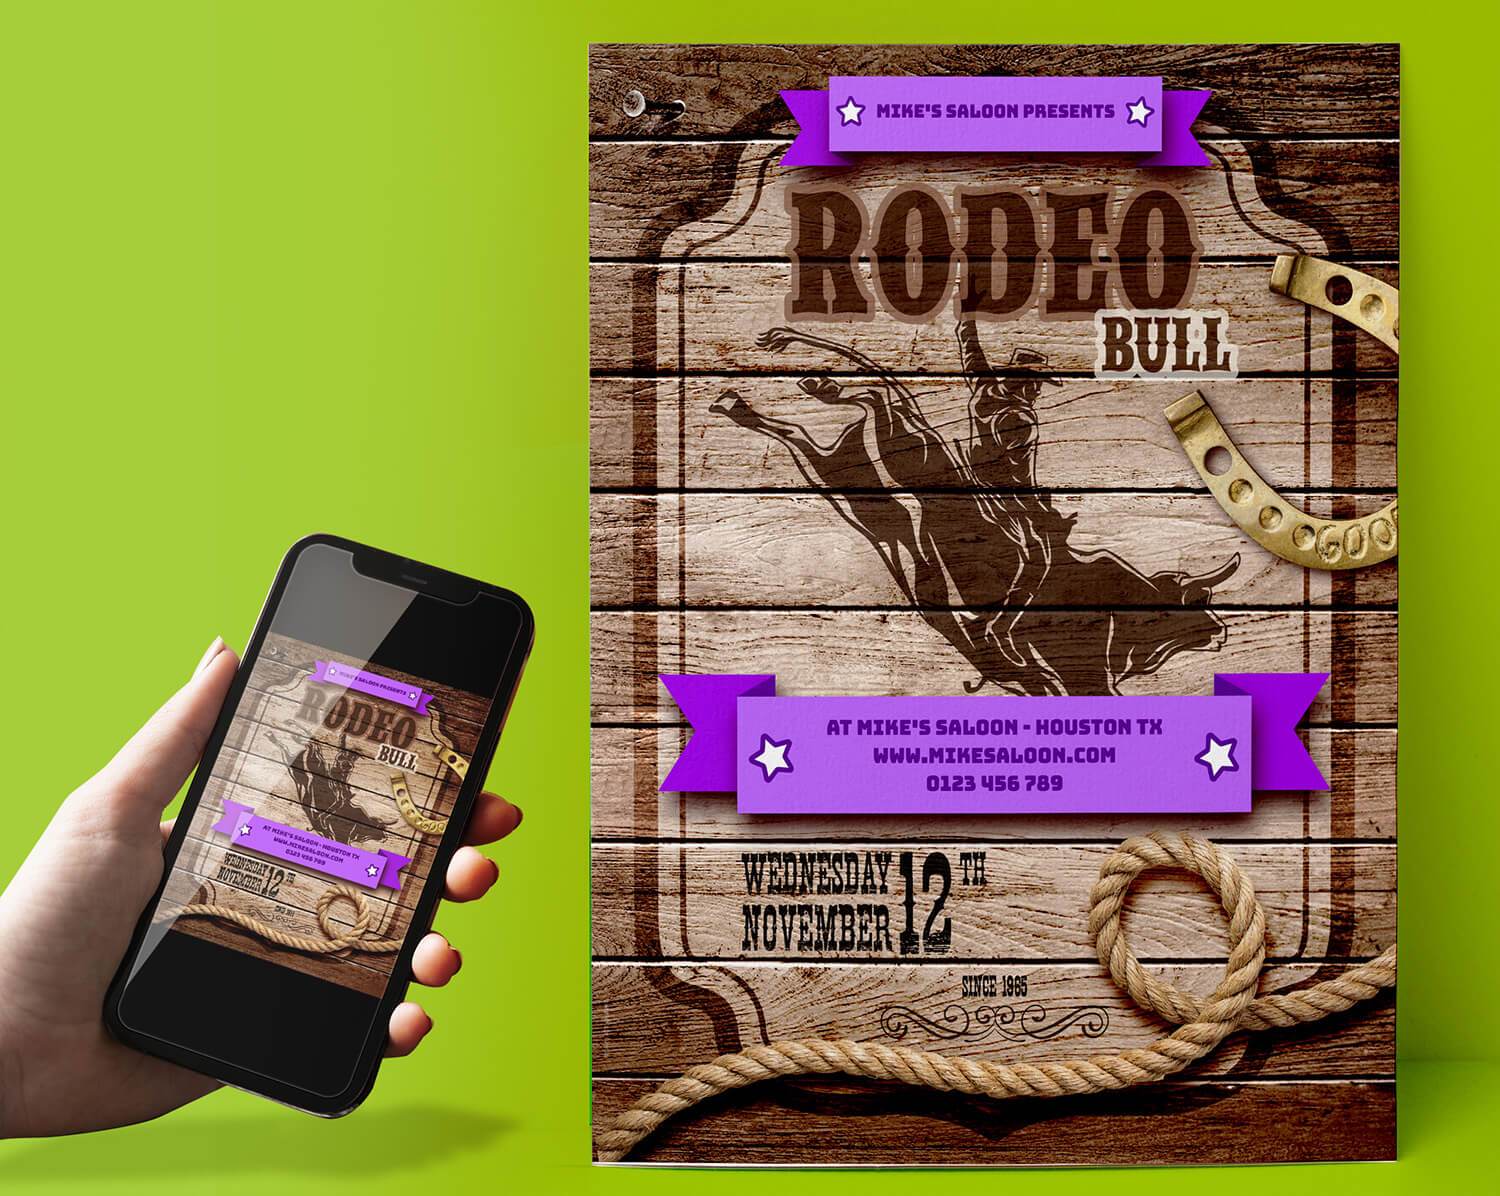 Rodeo bull flyer template